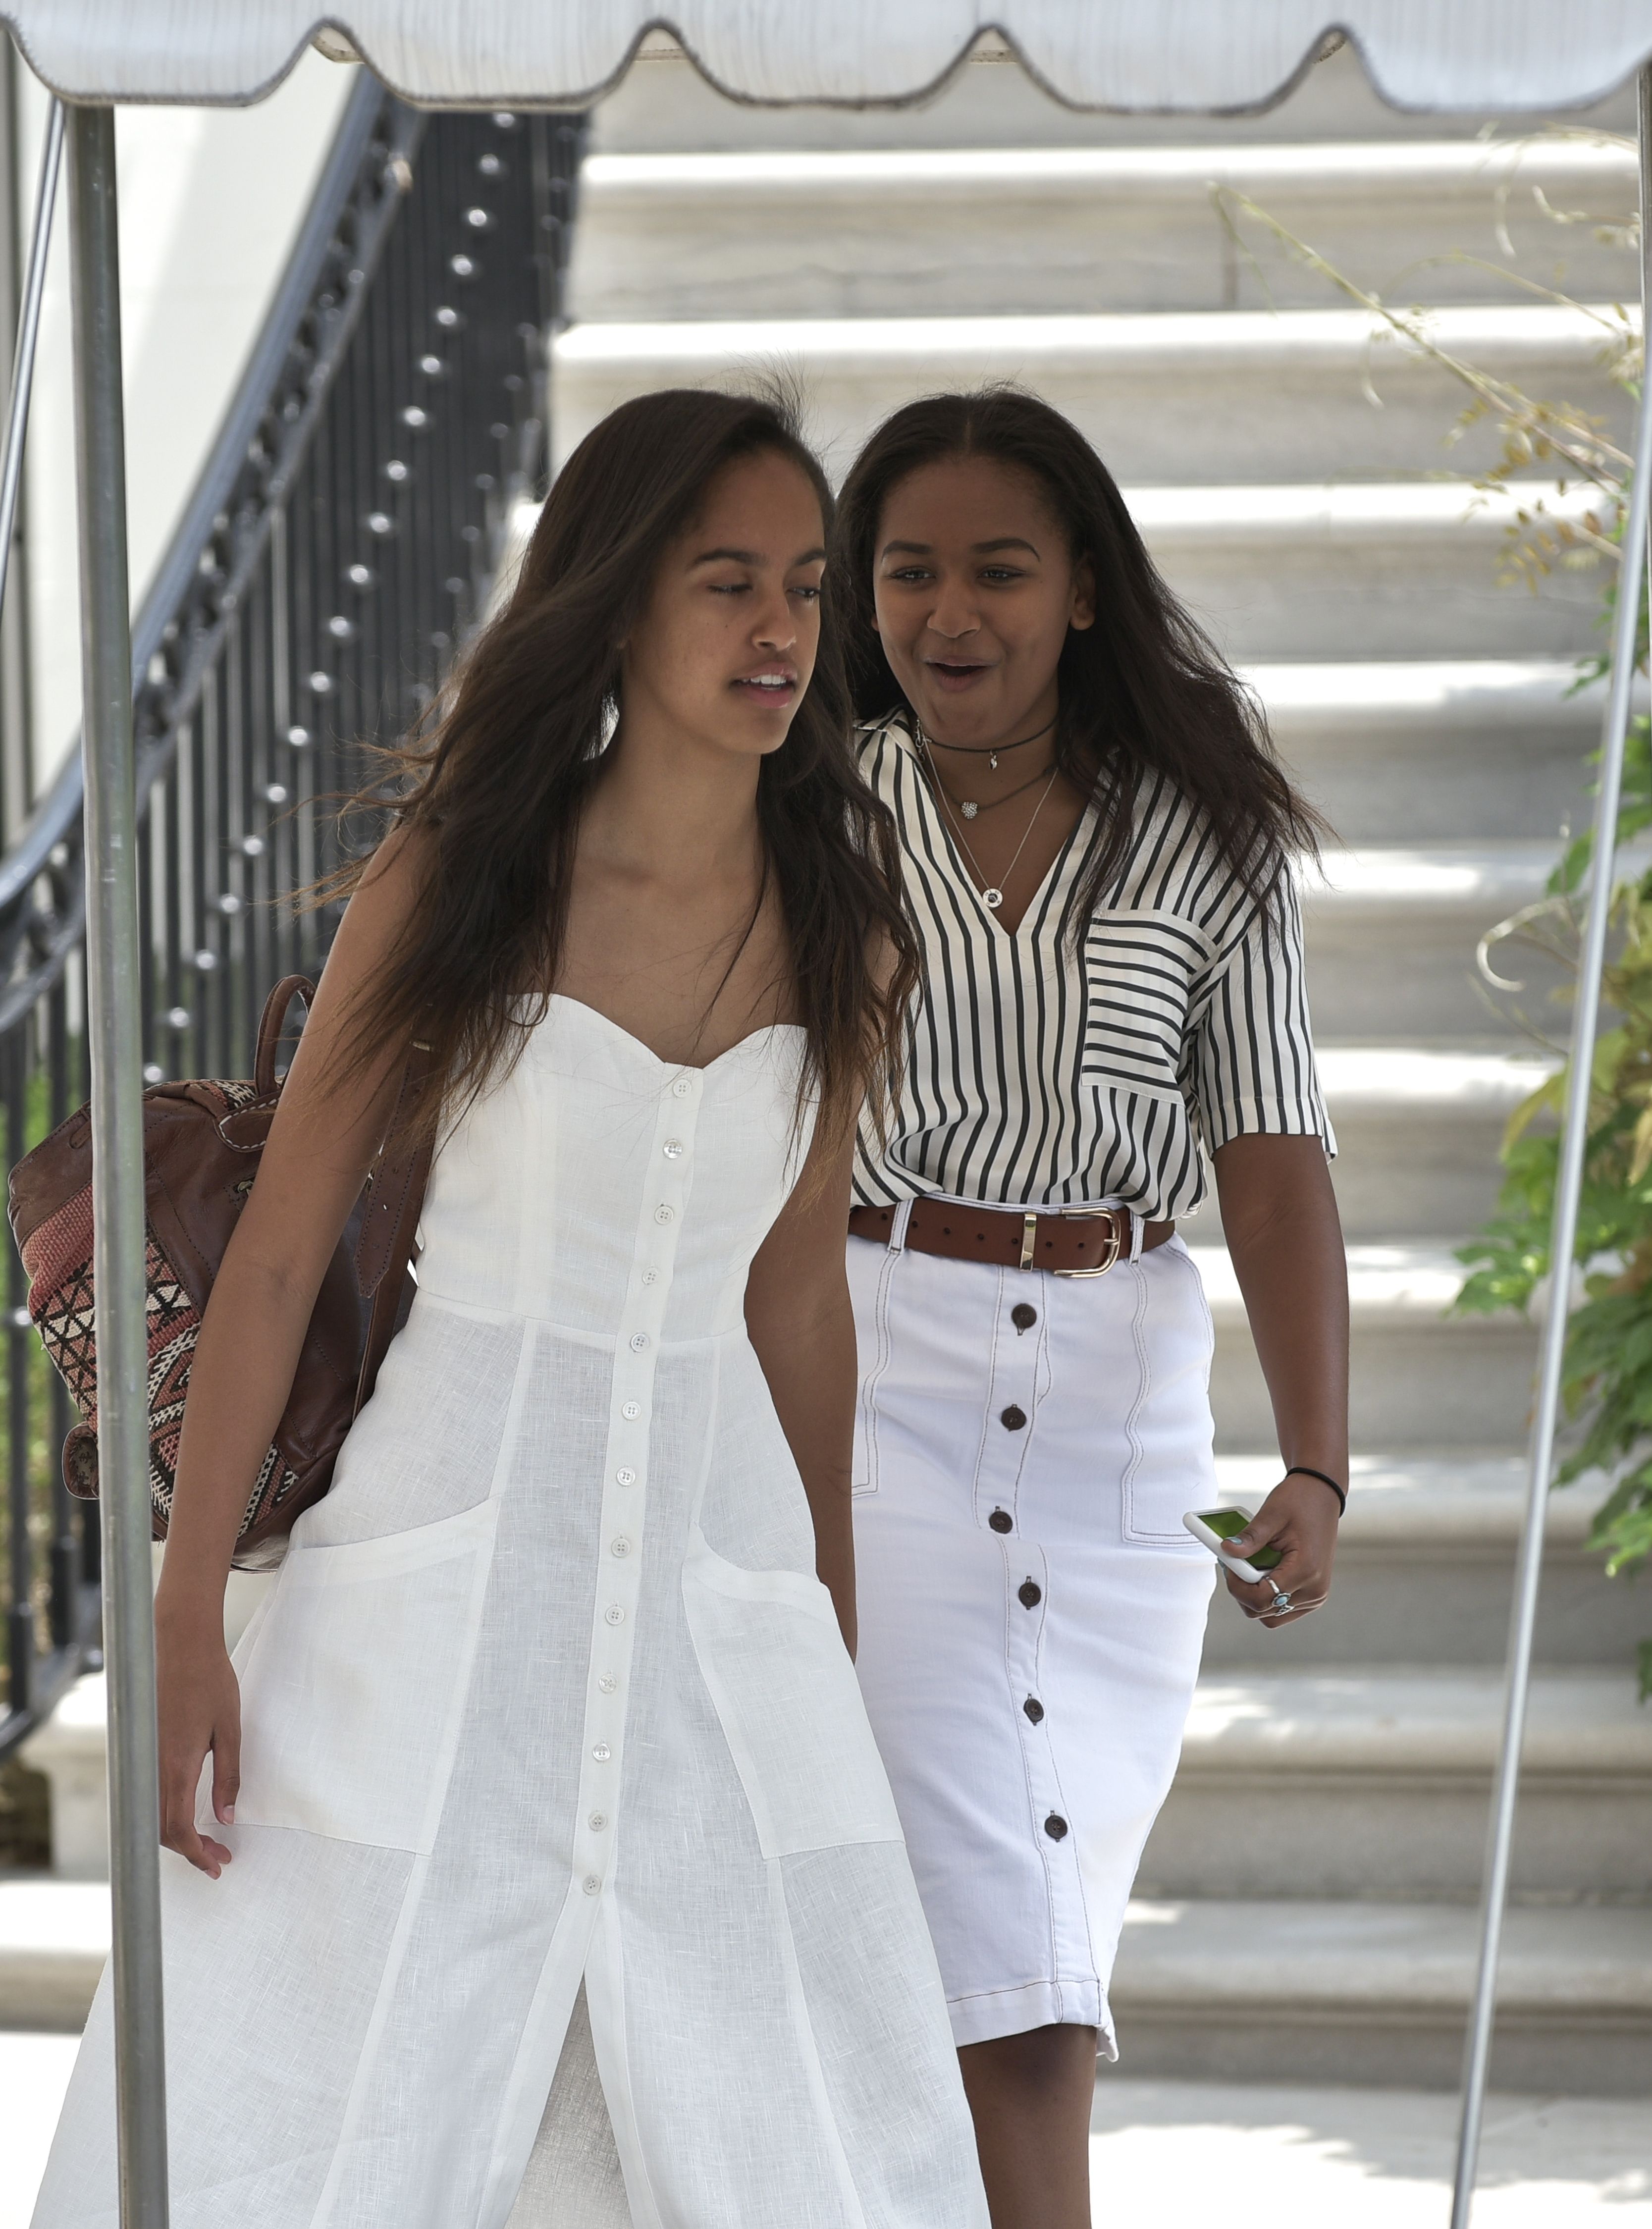 Malia and Sasha, the daughters of US President Barack Obama and First Lady Michelle Obama, make their way to board Marine One ahead of their parents on the South Lawn of the White House in Washington, DC, on August 6, 2016. | Source: Getty Images